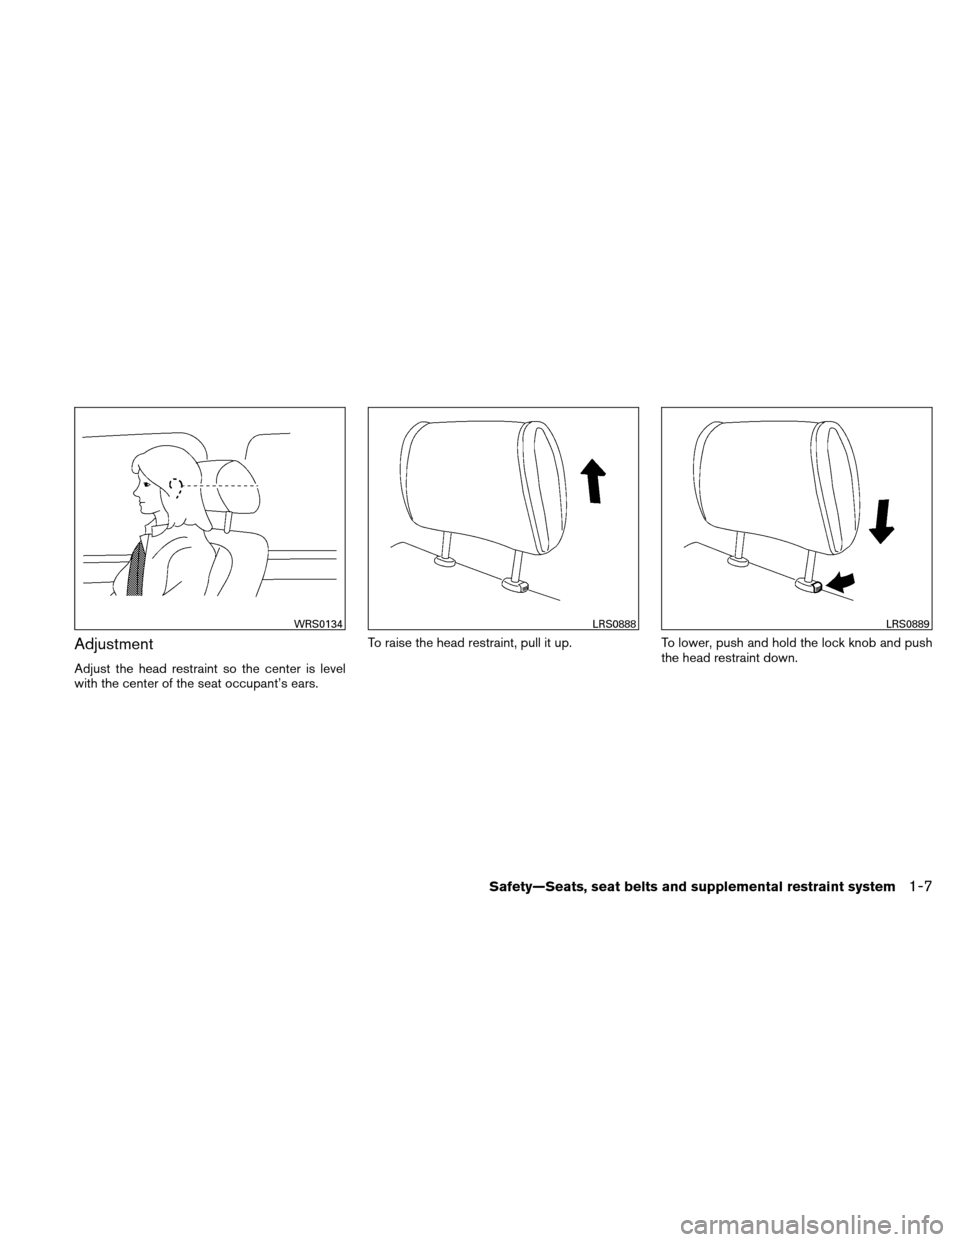 NISSAN VERSA HATCHBACK 2011 1.G Owners Manual Adjustment
Adjust the head restraint so the center is level
with the center of the seat occupant’s ears.To raise the head restraint, pull it up.
To lower, push and hold the lock knob and push
the he